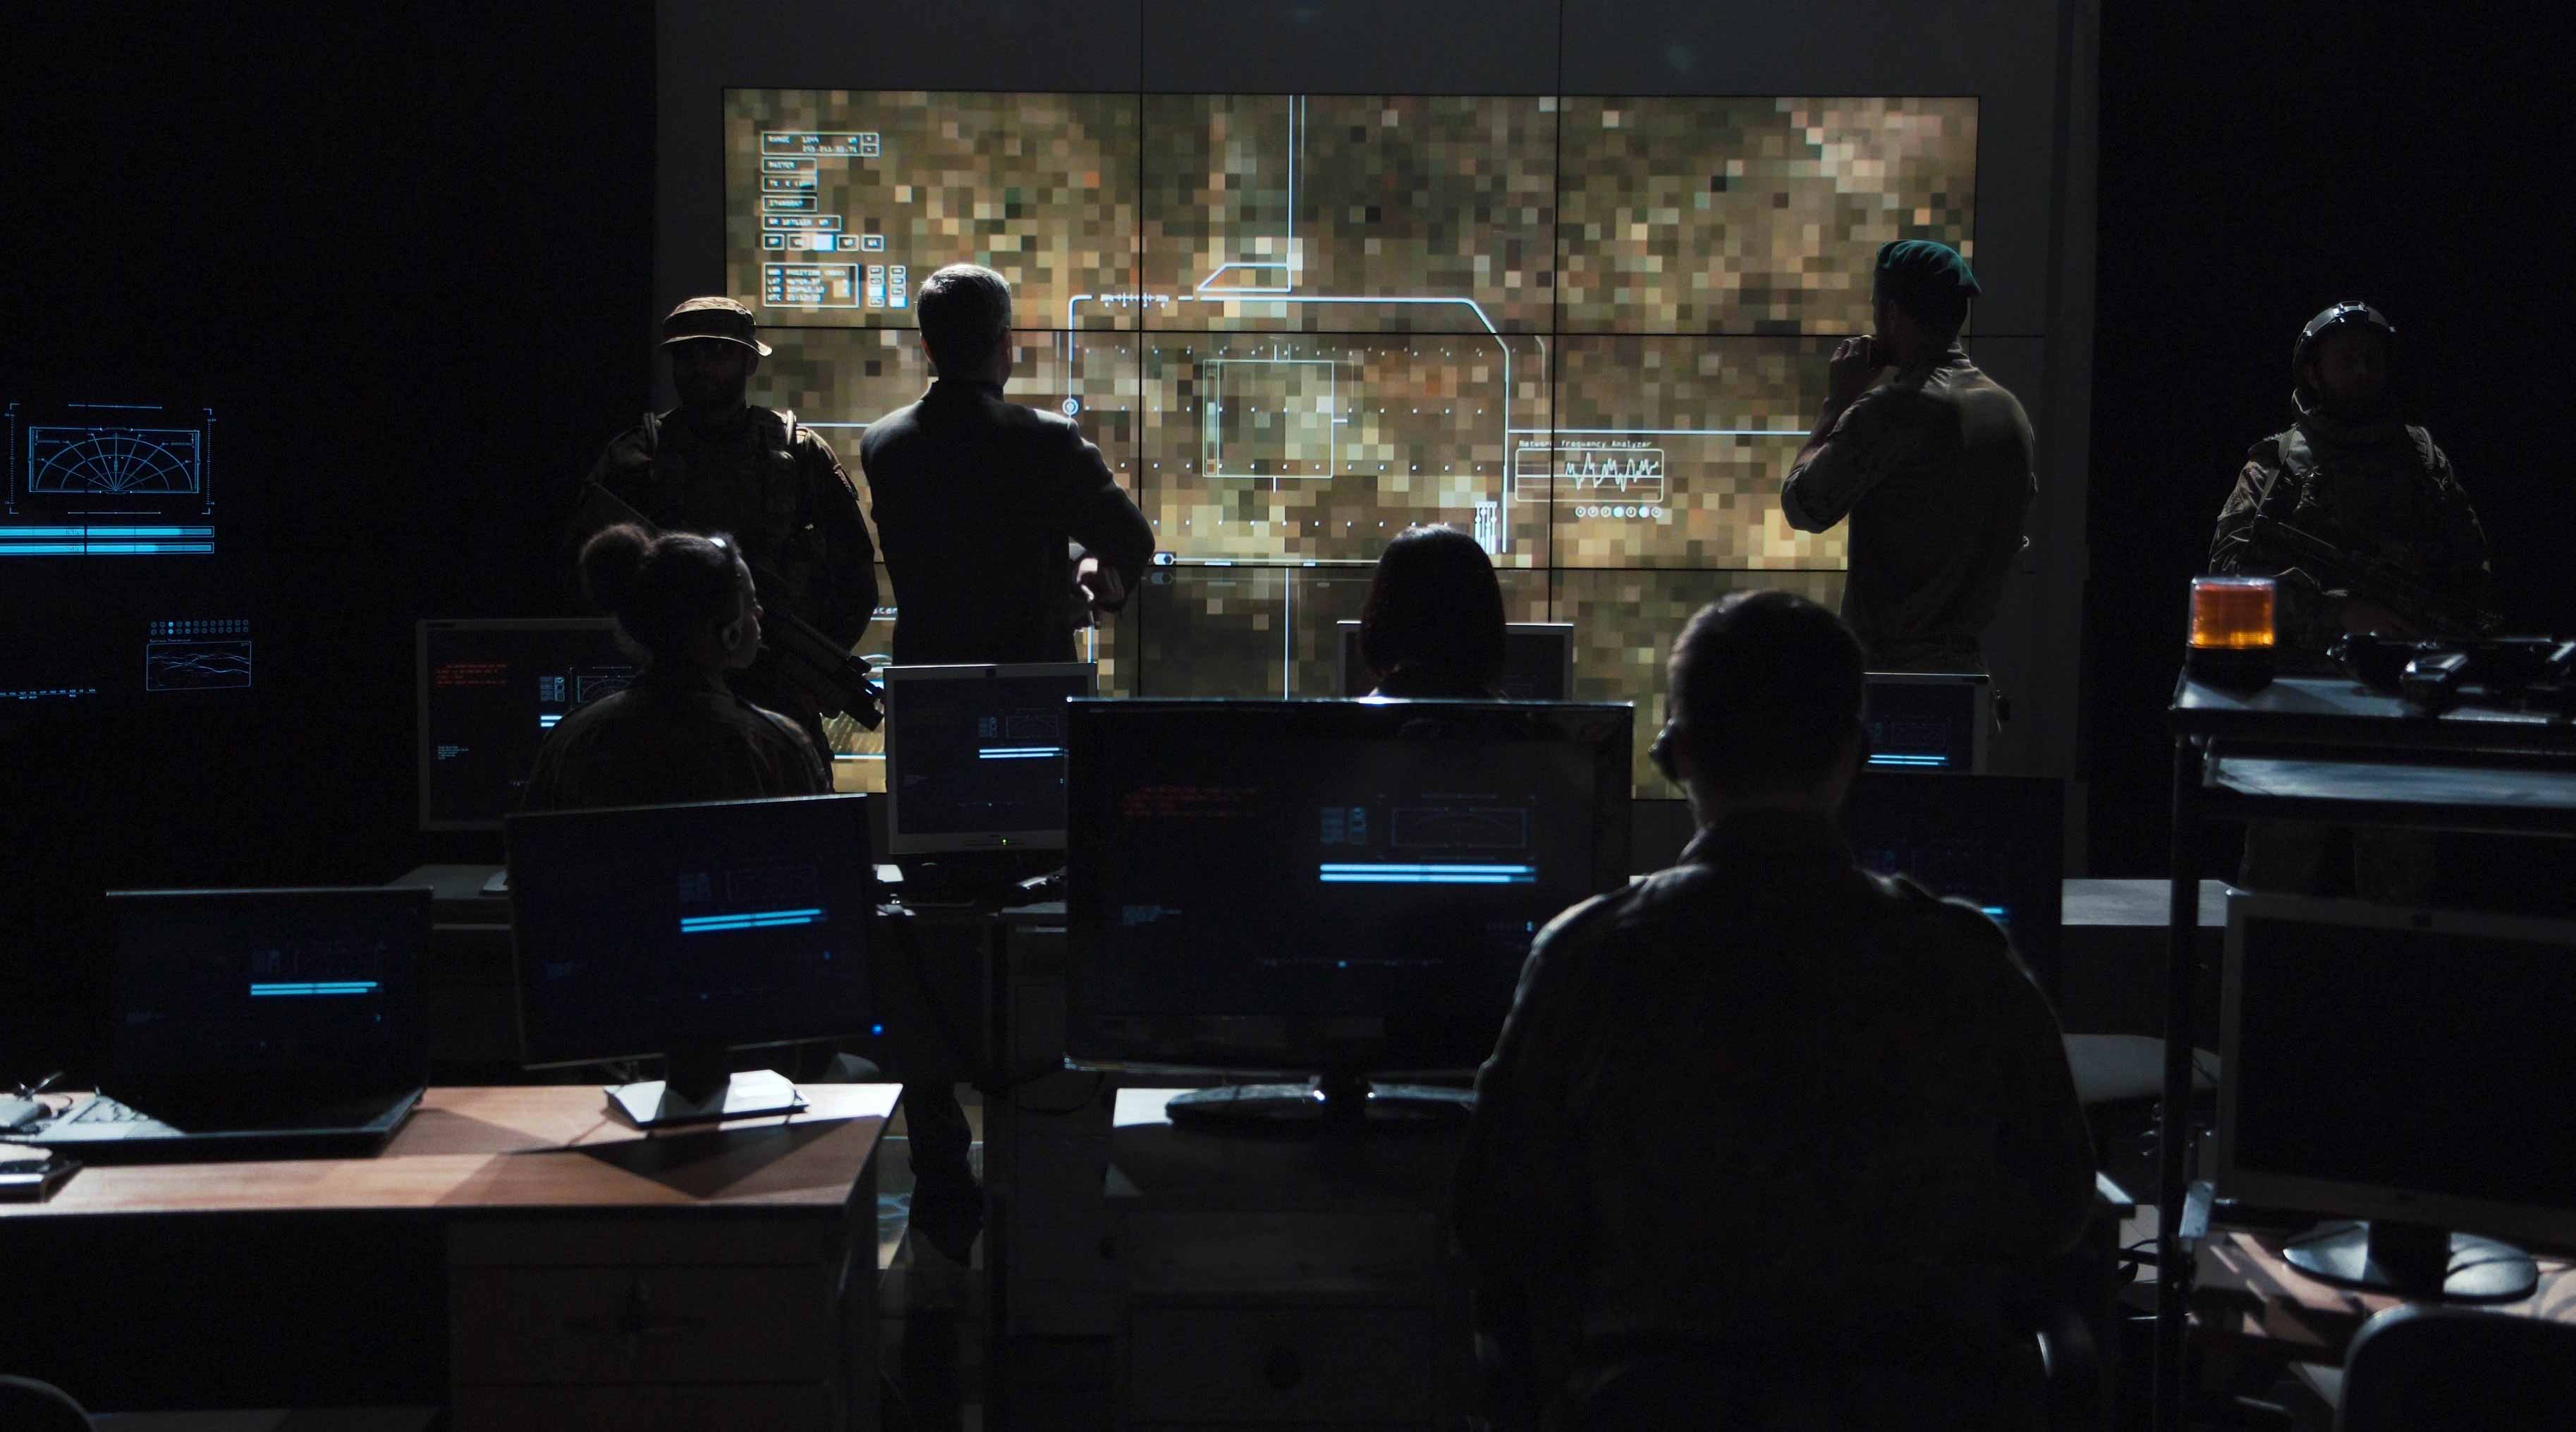 Military personnel watching drown footage on a large screen in a dark command center style room.